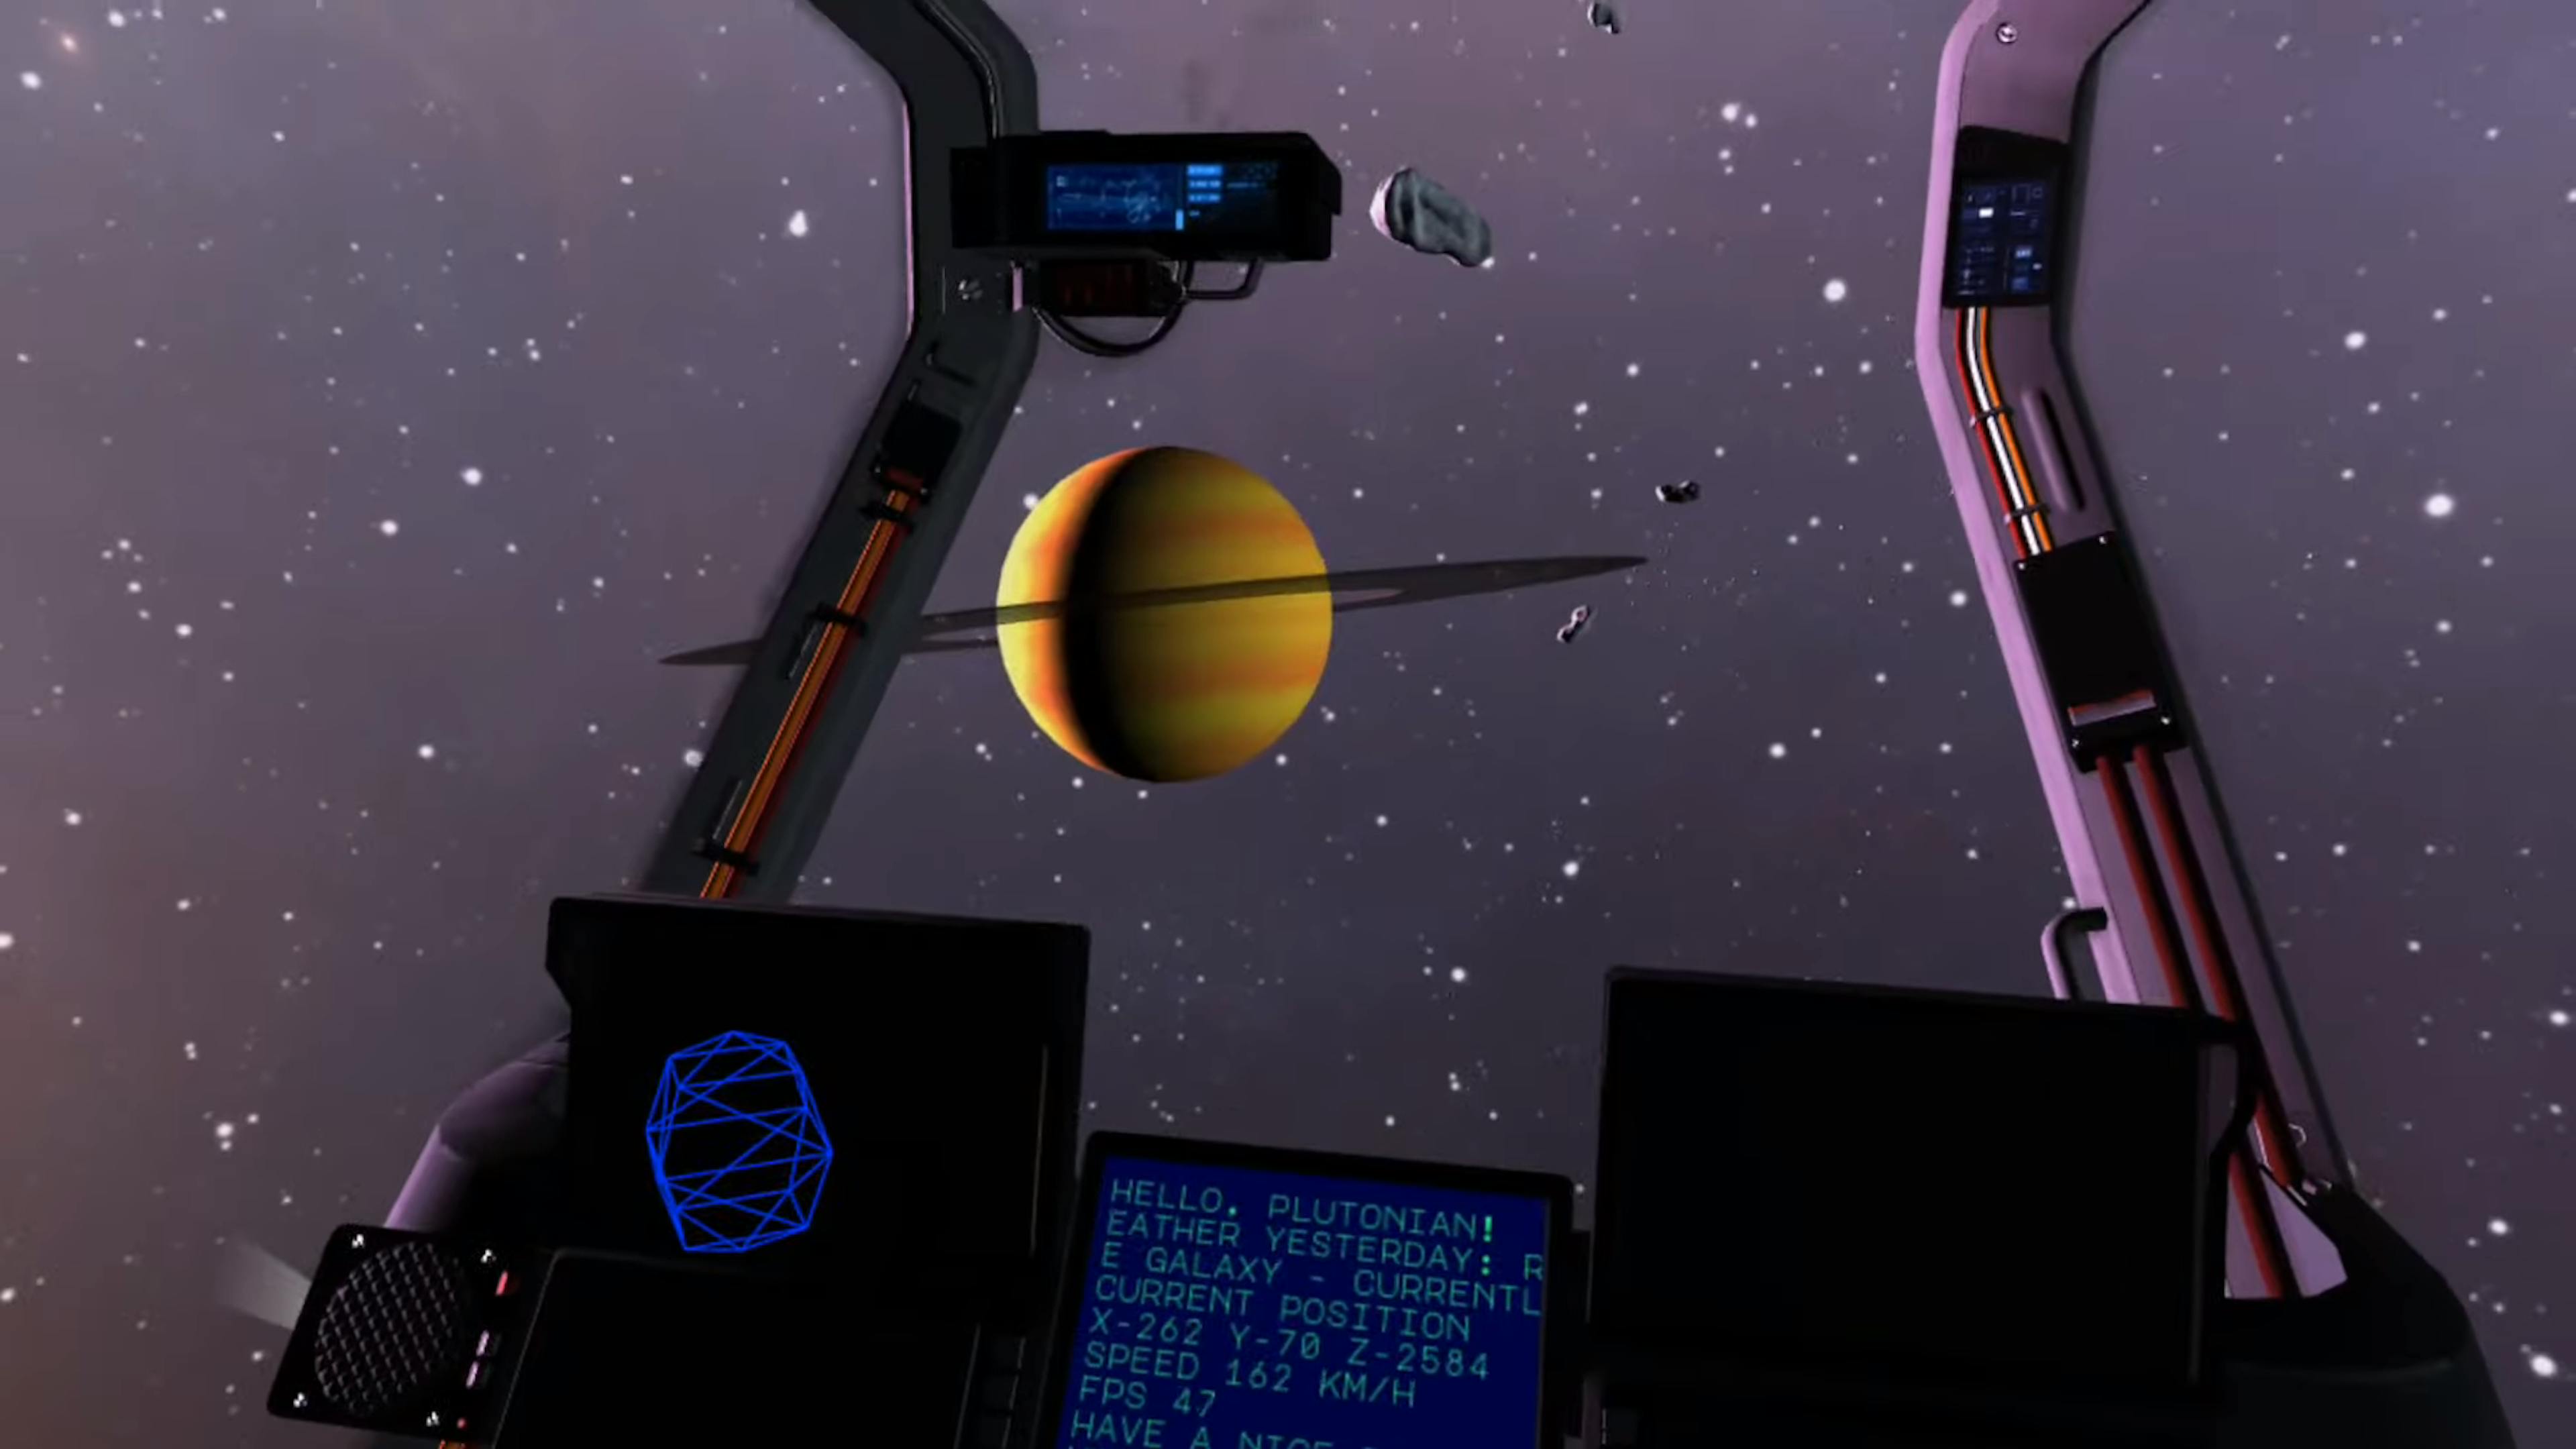 The game takes place in a virtual reality perspective.